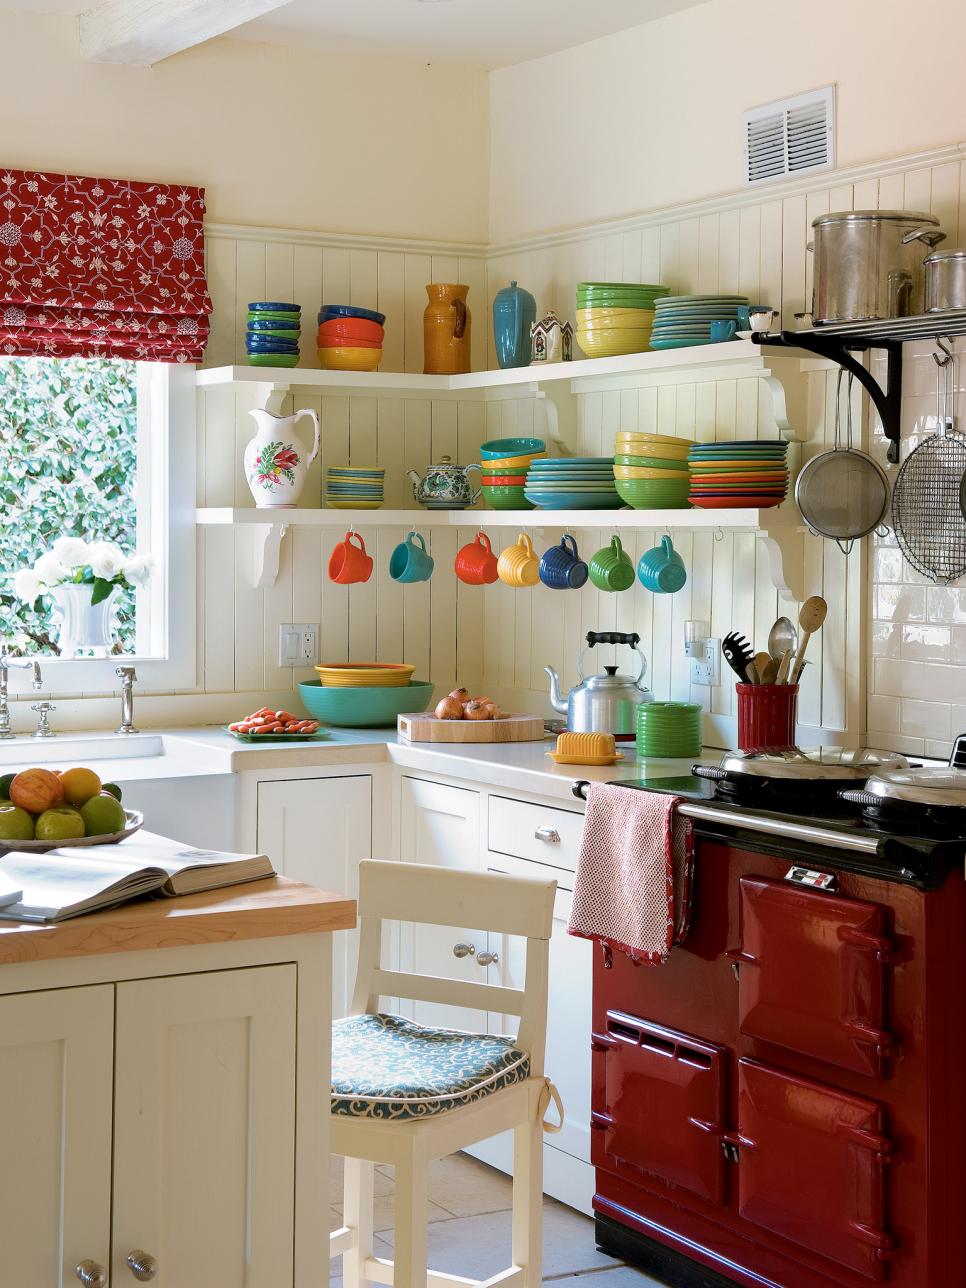 Cool Pictures of Small Kitchen Design Ideas From HGTV | HGTV kitchen designs for small kitchens